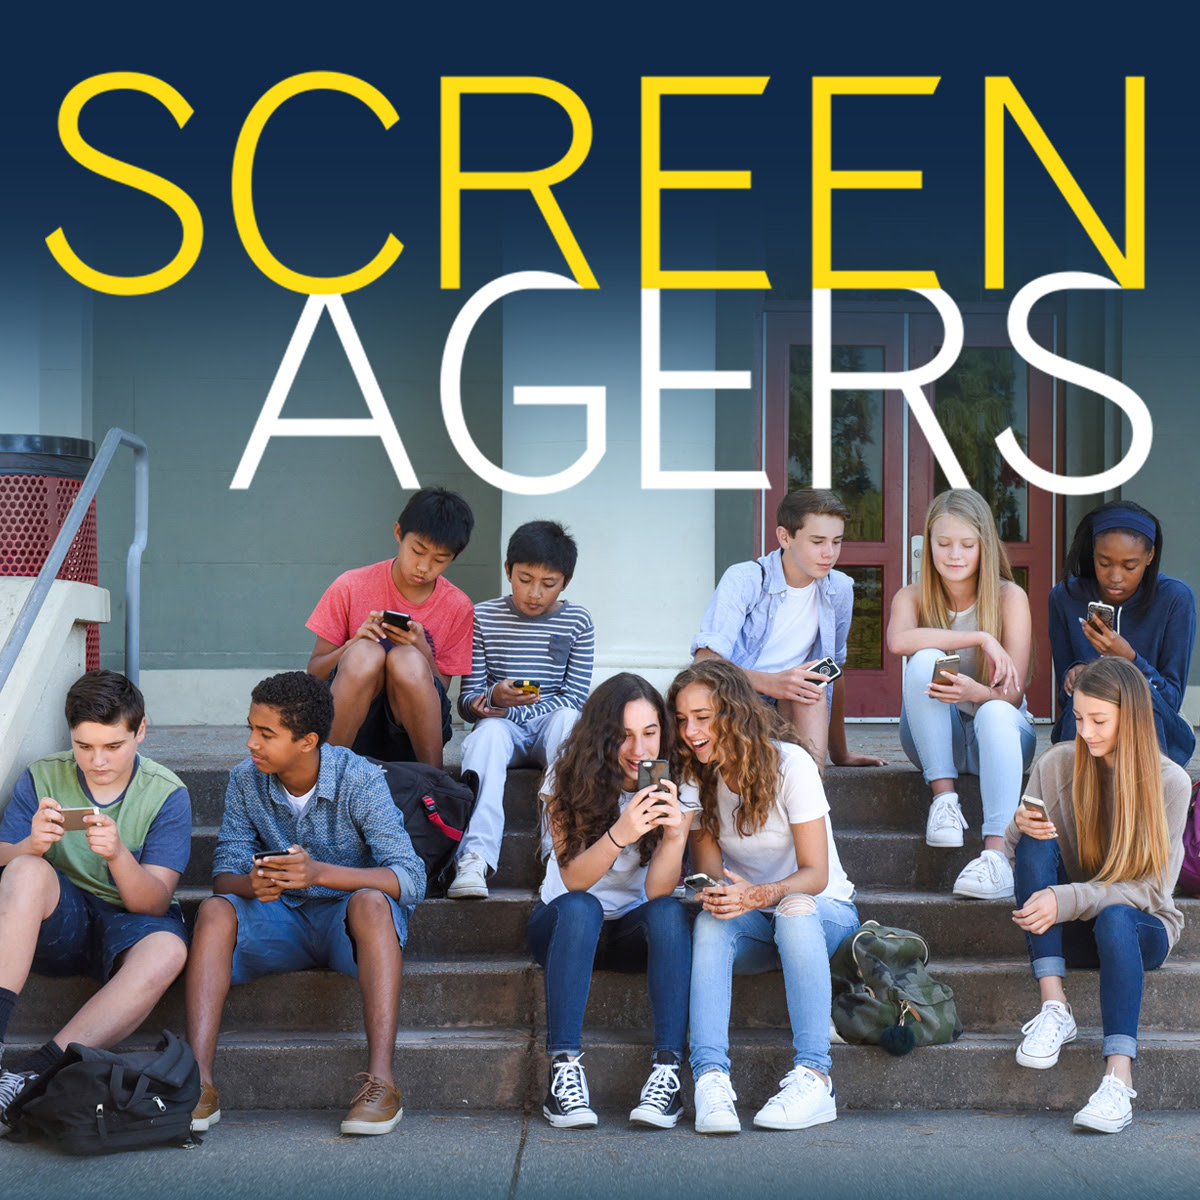 Screenagers Film Presented By Dodge Center Ministerial and Triton Schools